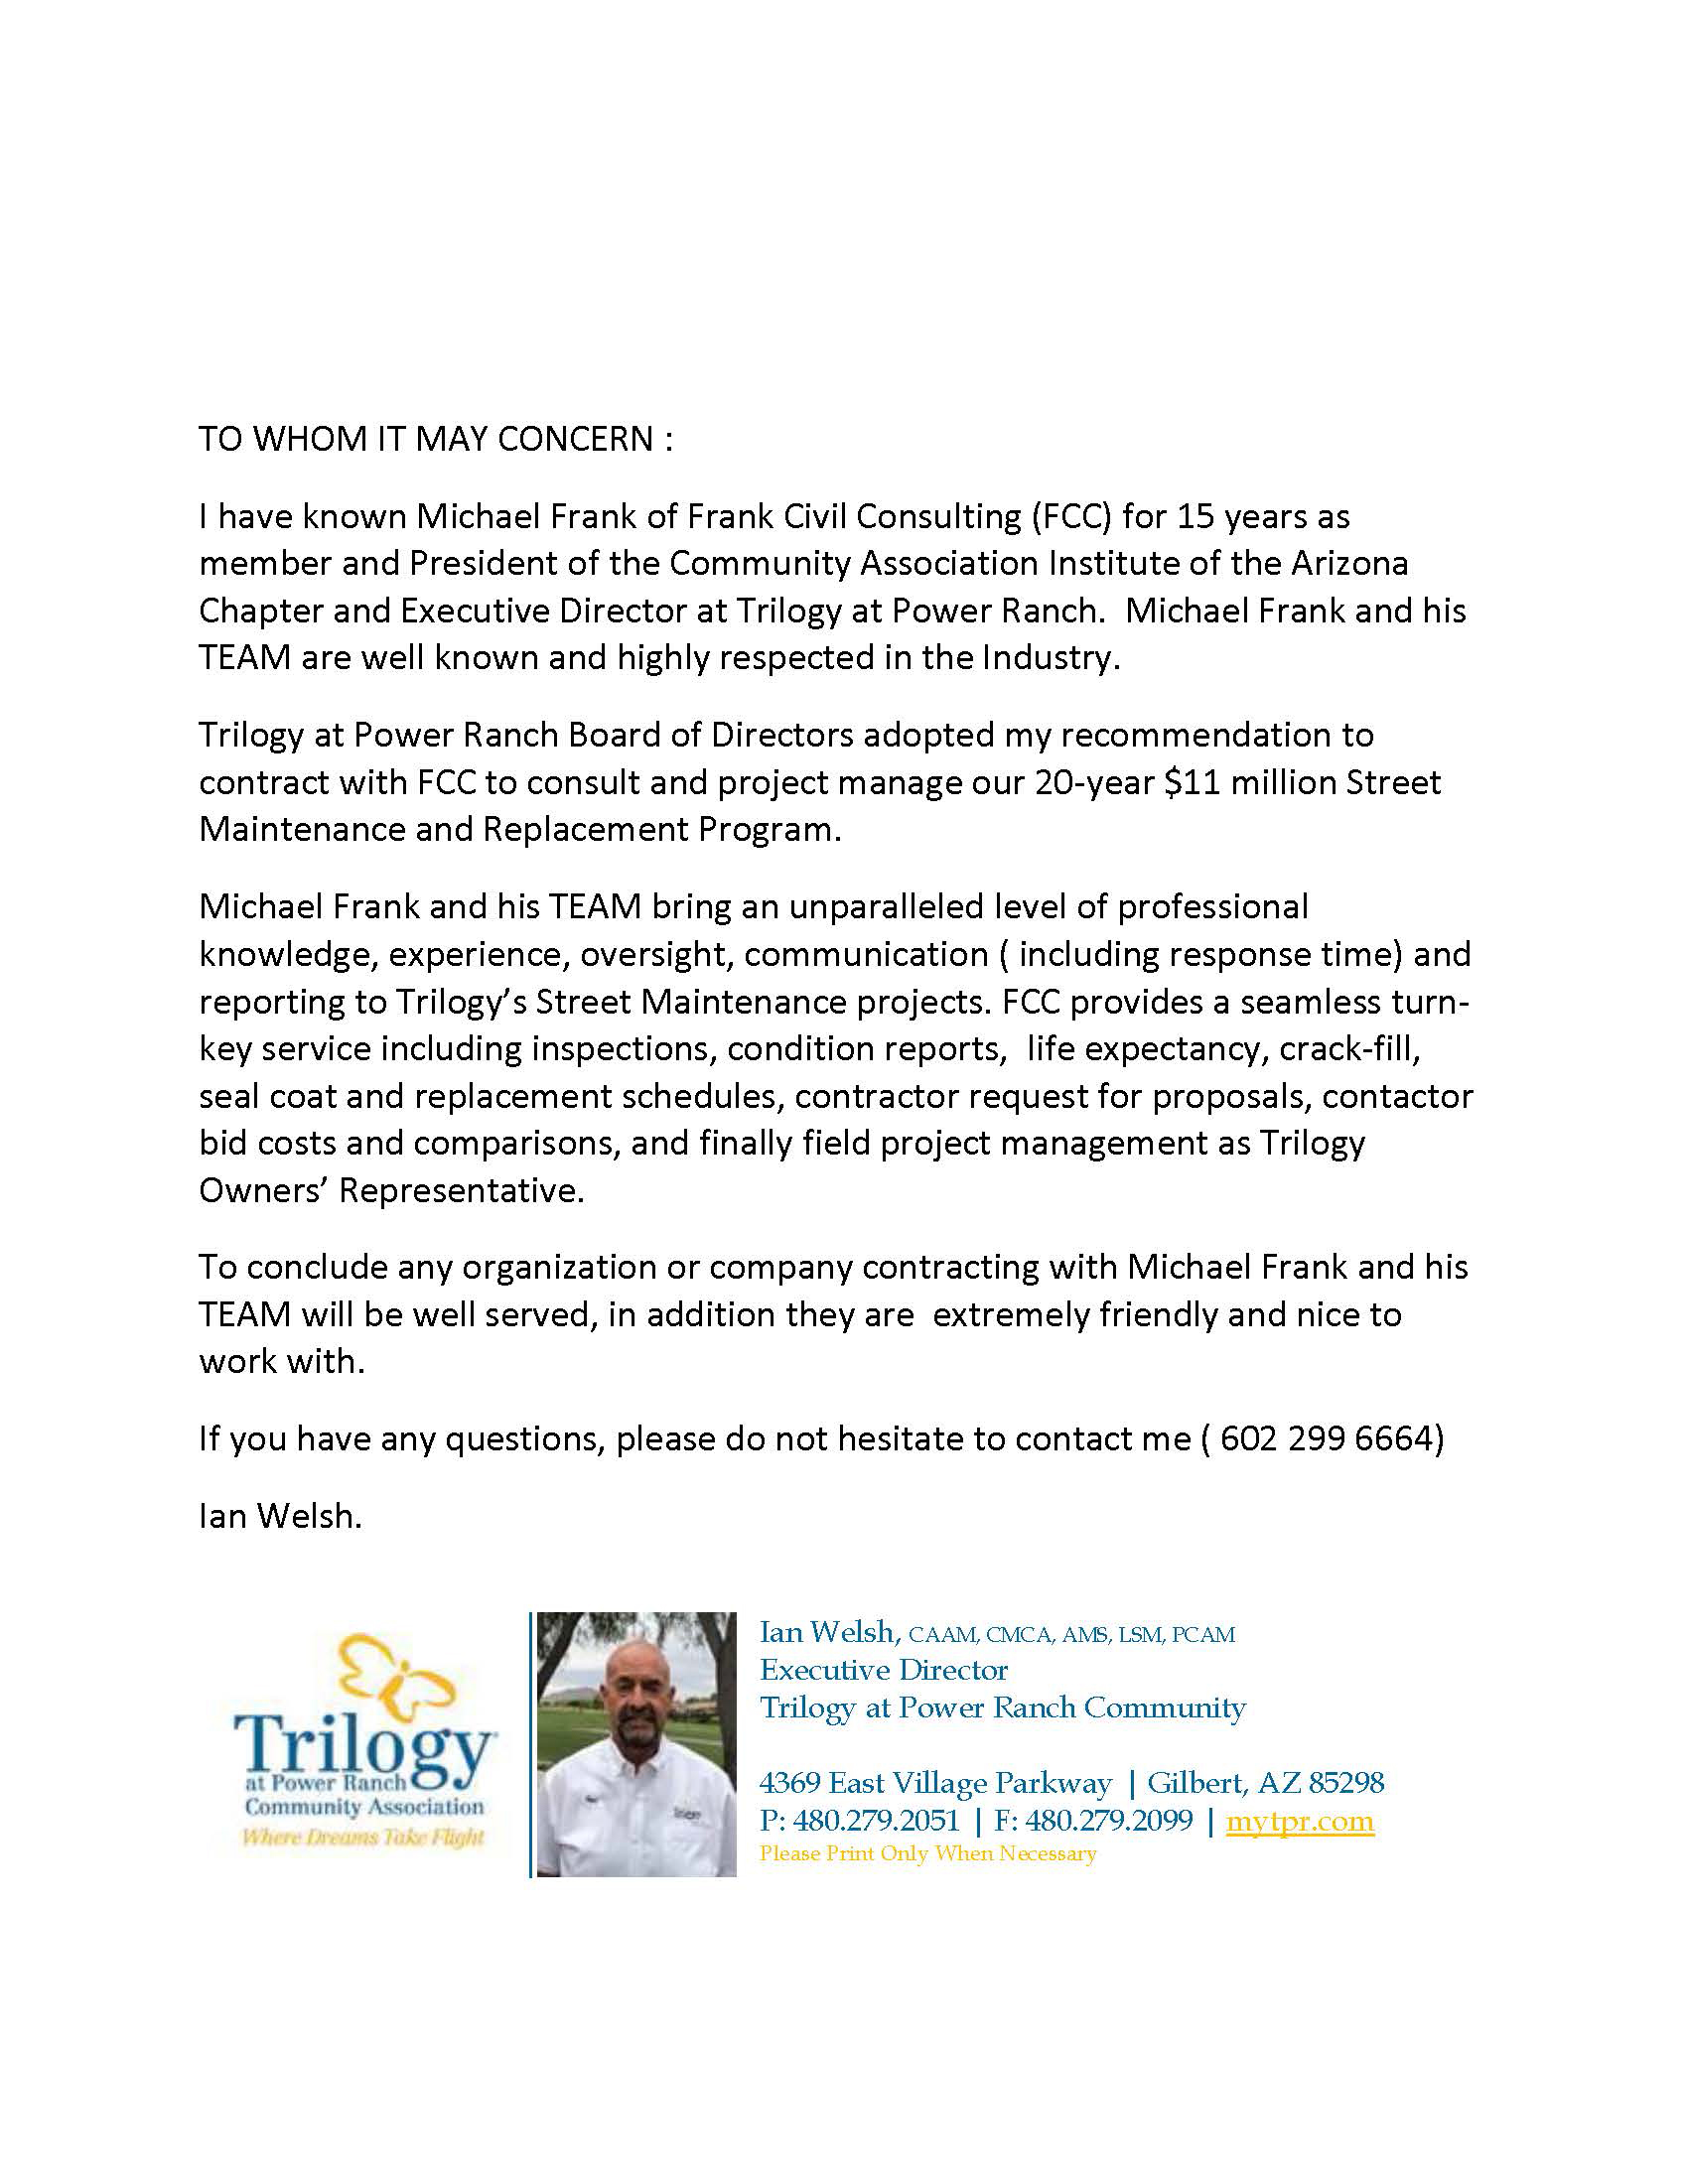 Trilogy at Power Ranch - Letter of Recommendation